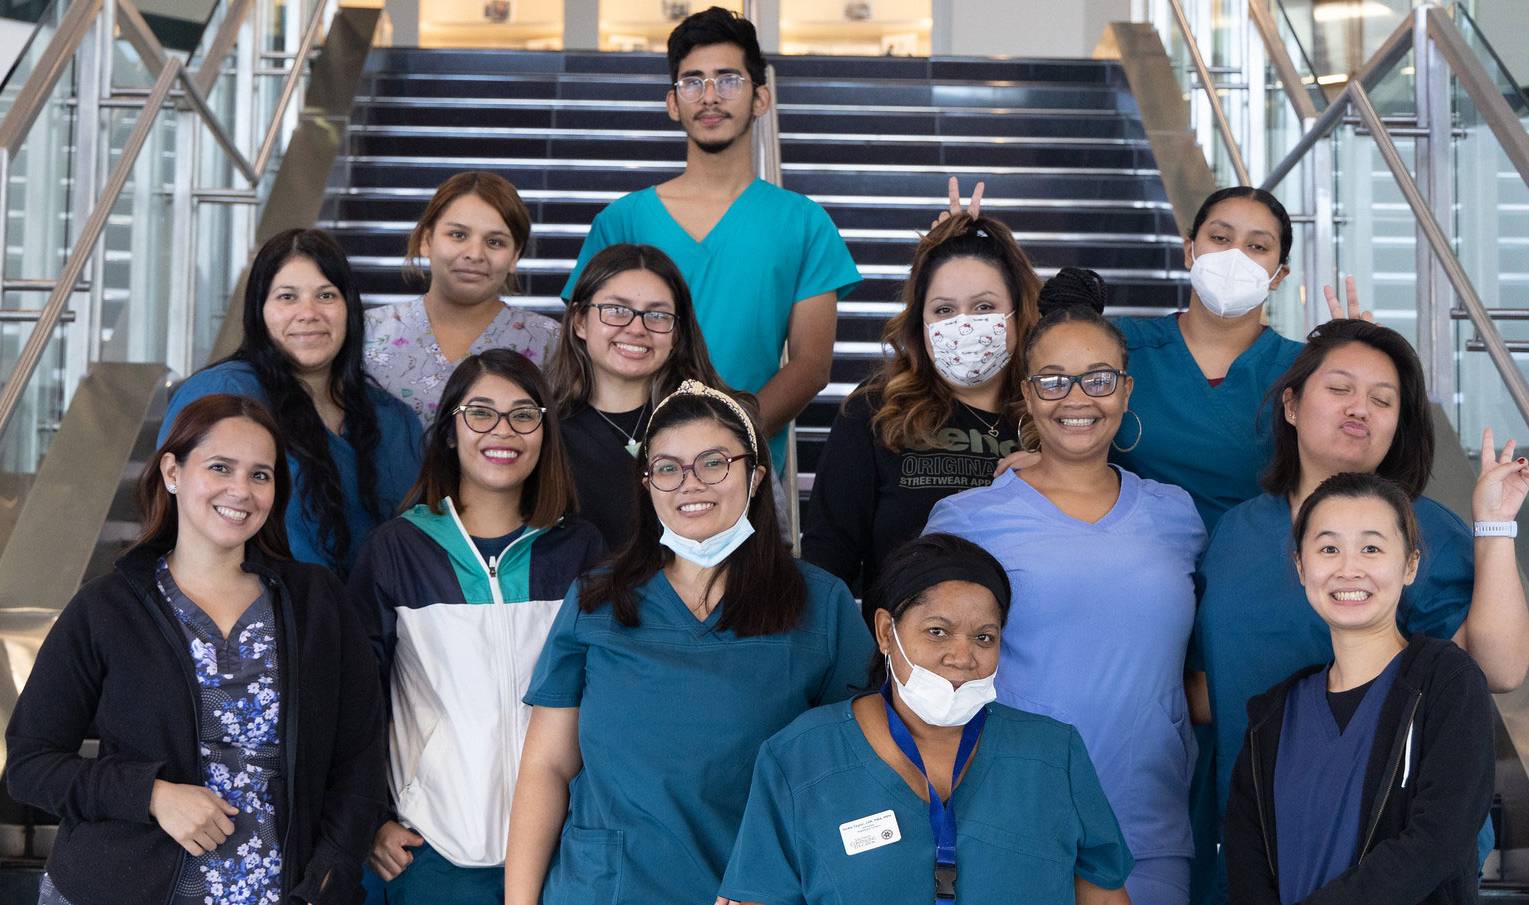 13 healthcare students in scrubs take a group photo on stairs